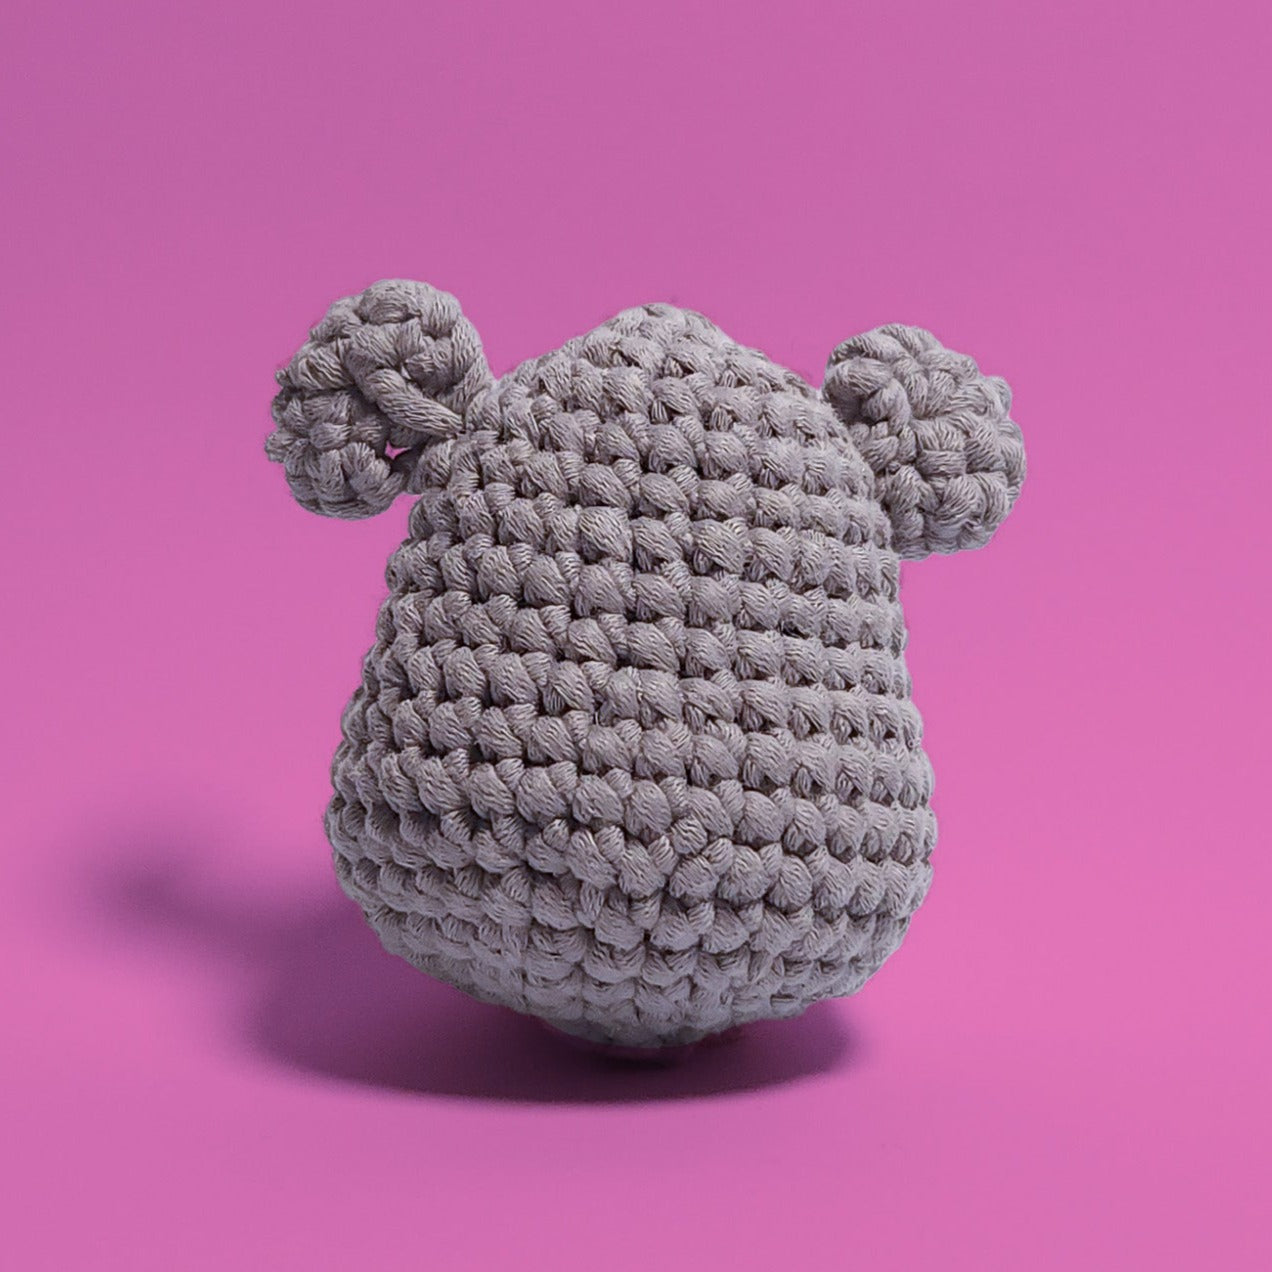 Mandy the Koala crochet amigurumi, a cuddly companion from our beginner-friendly crochet kits. Handcrafted with care, Mandy features a charming design perfect for beginners and koala enthusiasts. Back view.